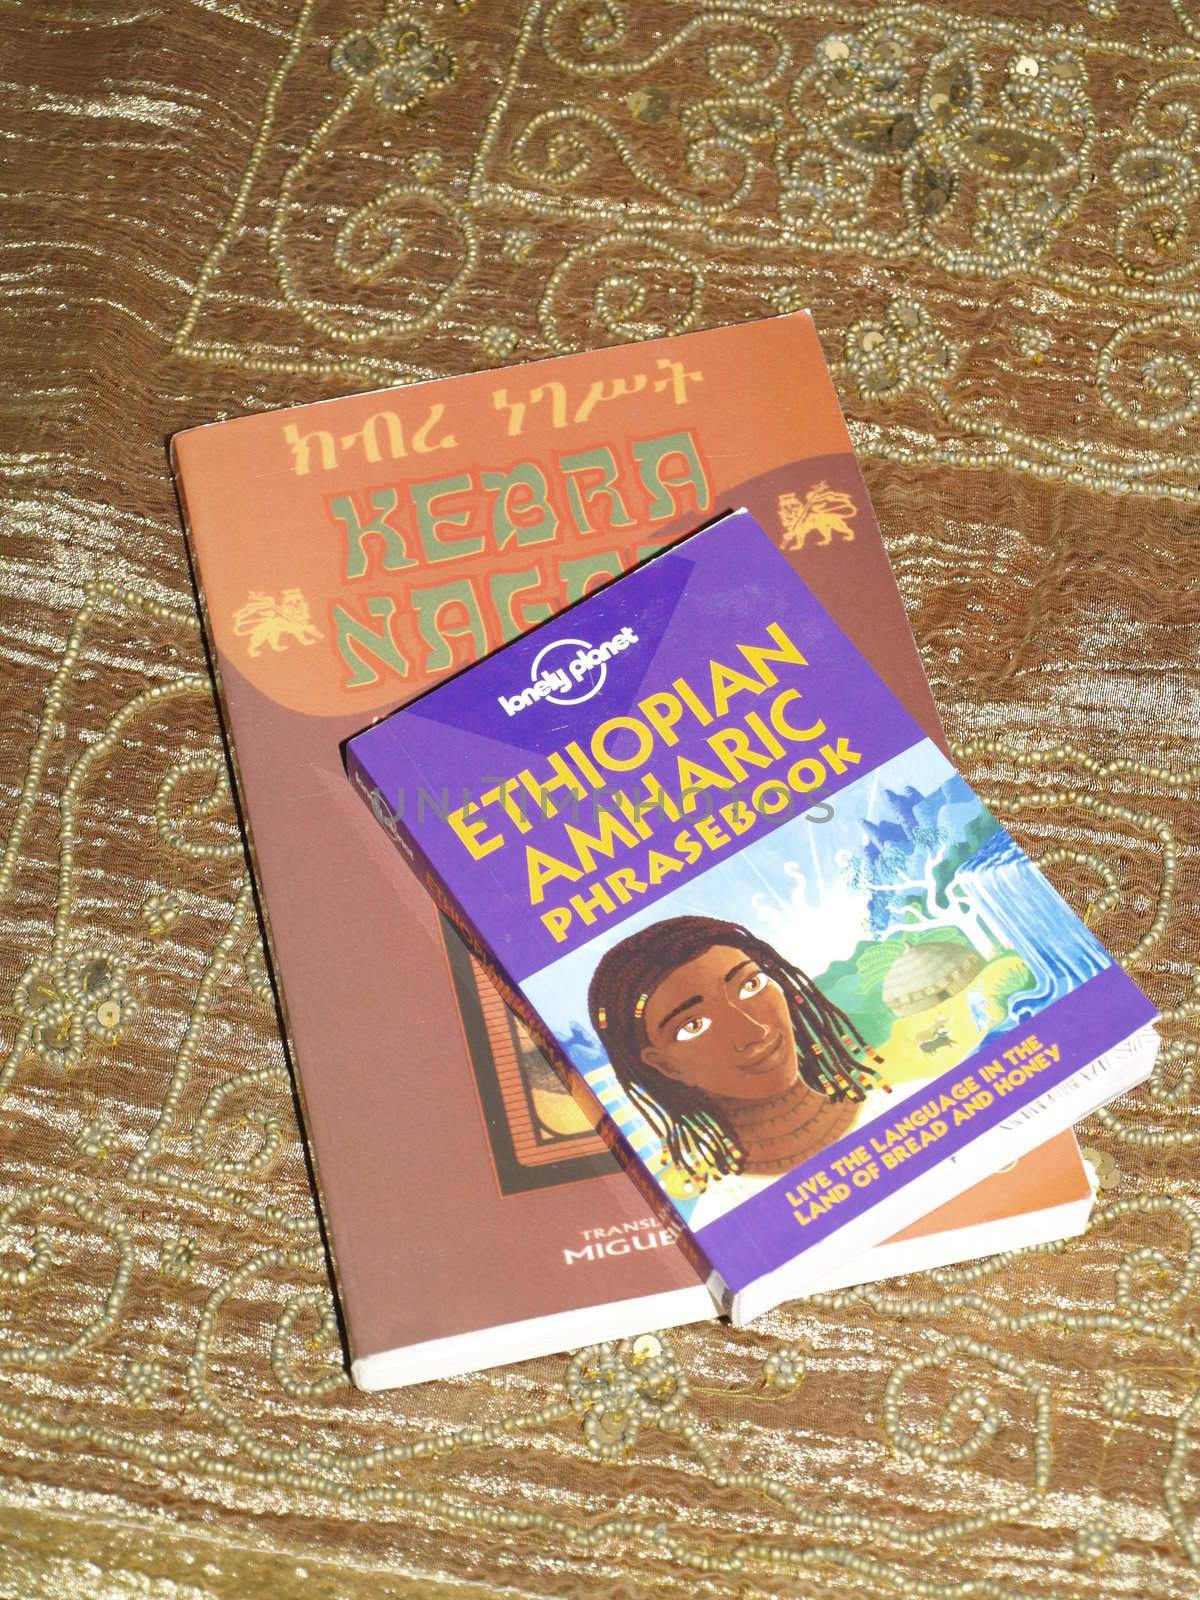 ethiopian phracebook and the glory of kings book